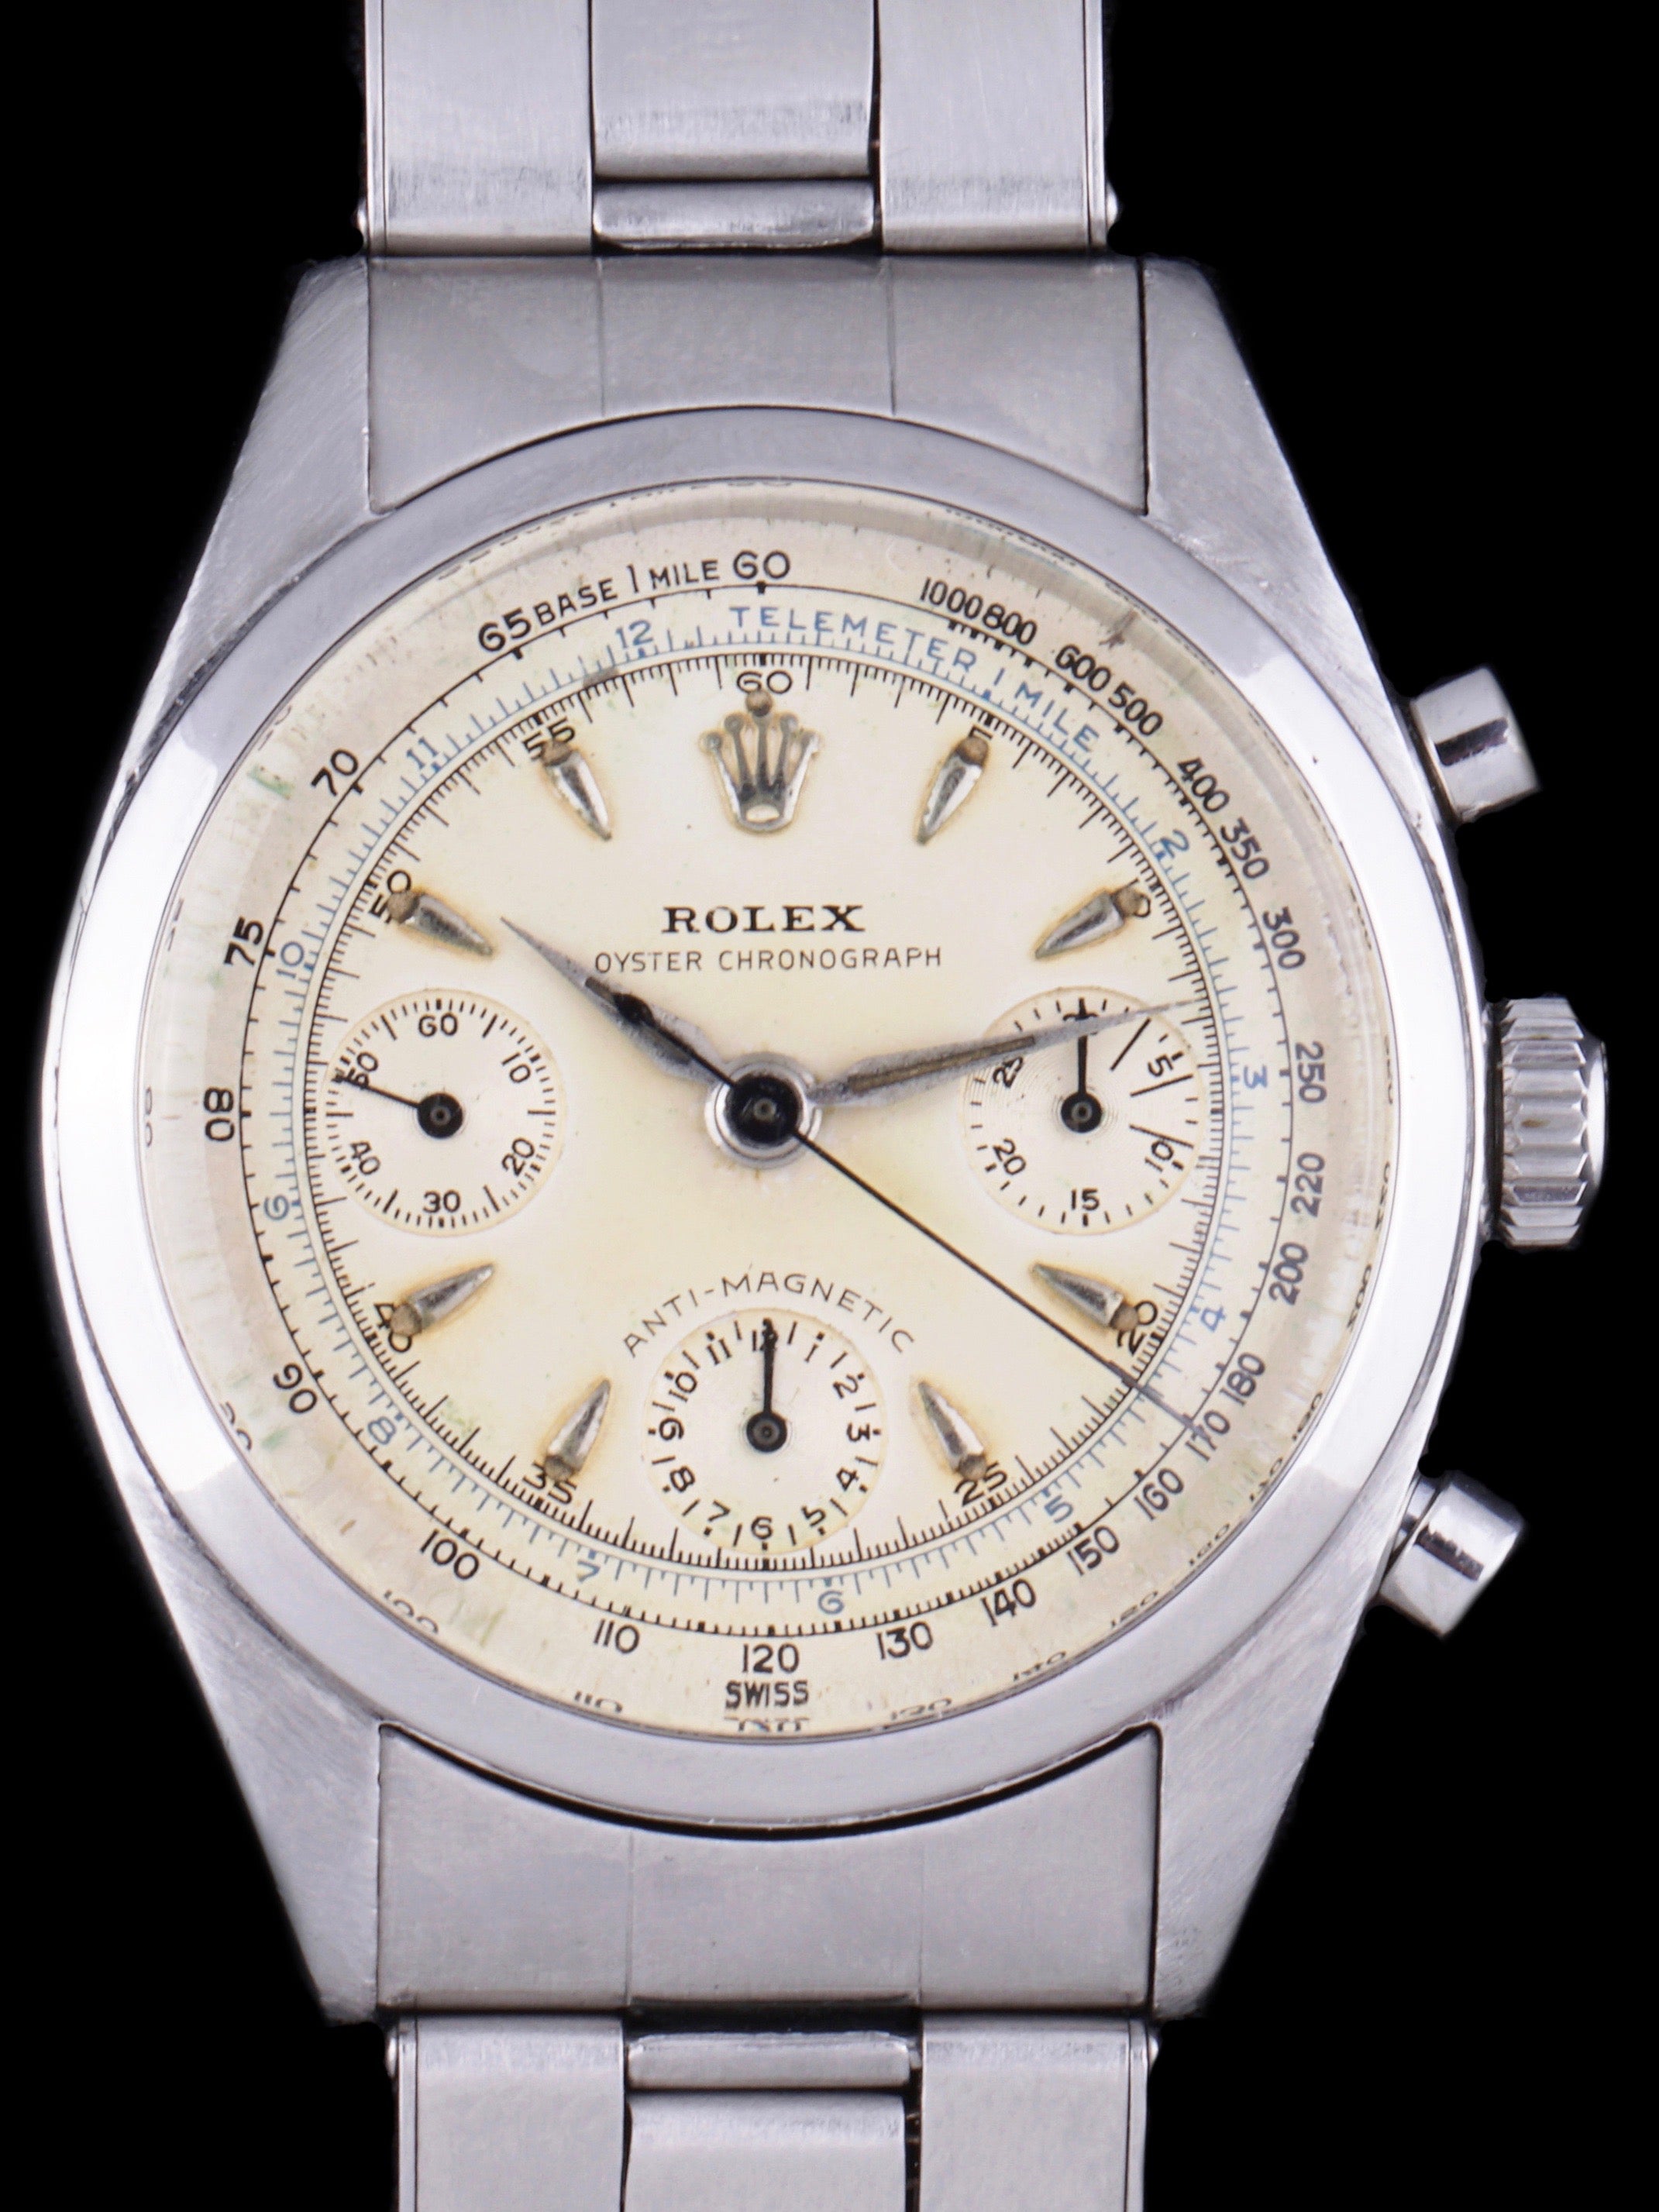 1959 Rolex Chronograph Pre-Daytona (Ref.6234) Box, Papers, Letters From Original Owner